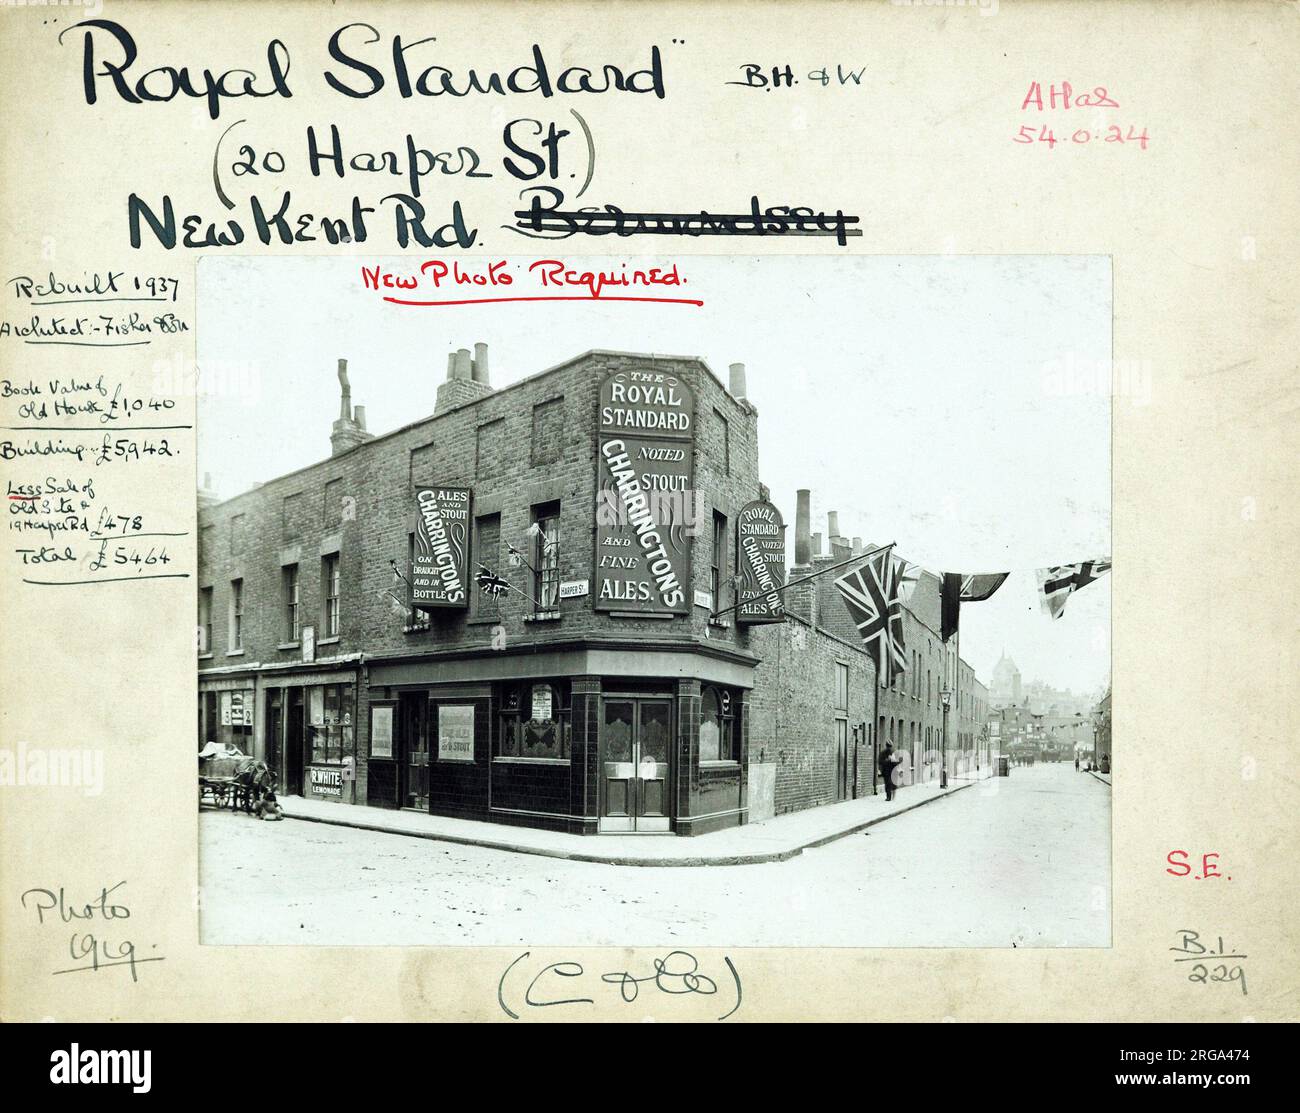 Photograph of Royal Standard PH, New Kent Road (Old), London. The main side of the print (shown here) depicts: Corner on view of the pub.  The back of the print (available on request) details: Trading Record 1913 . 1941 for the Royal Standard, New Kent Road (Old), London SE1 6AD. As of July 2018 . Demolished and rebuilt 1937 Stock Photo